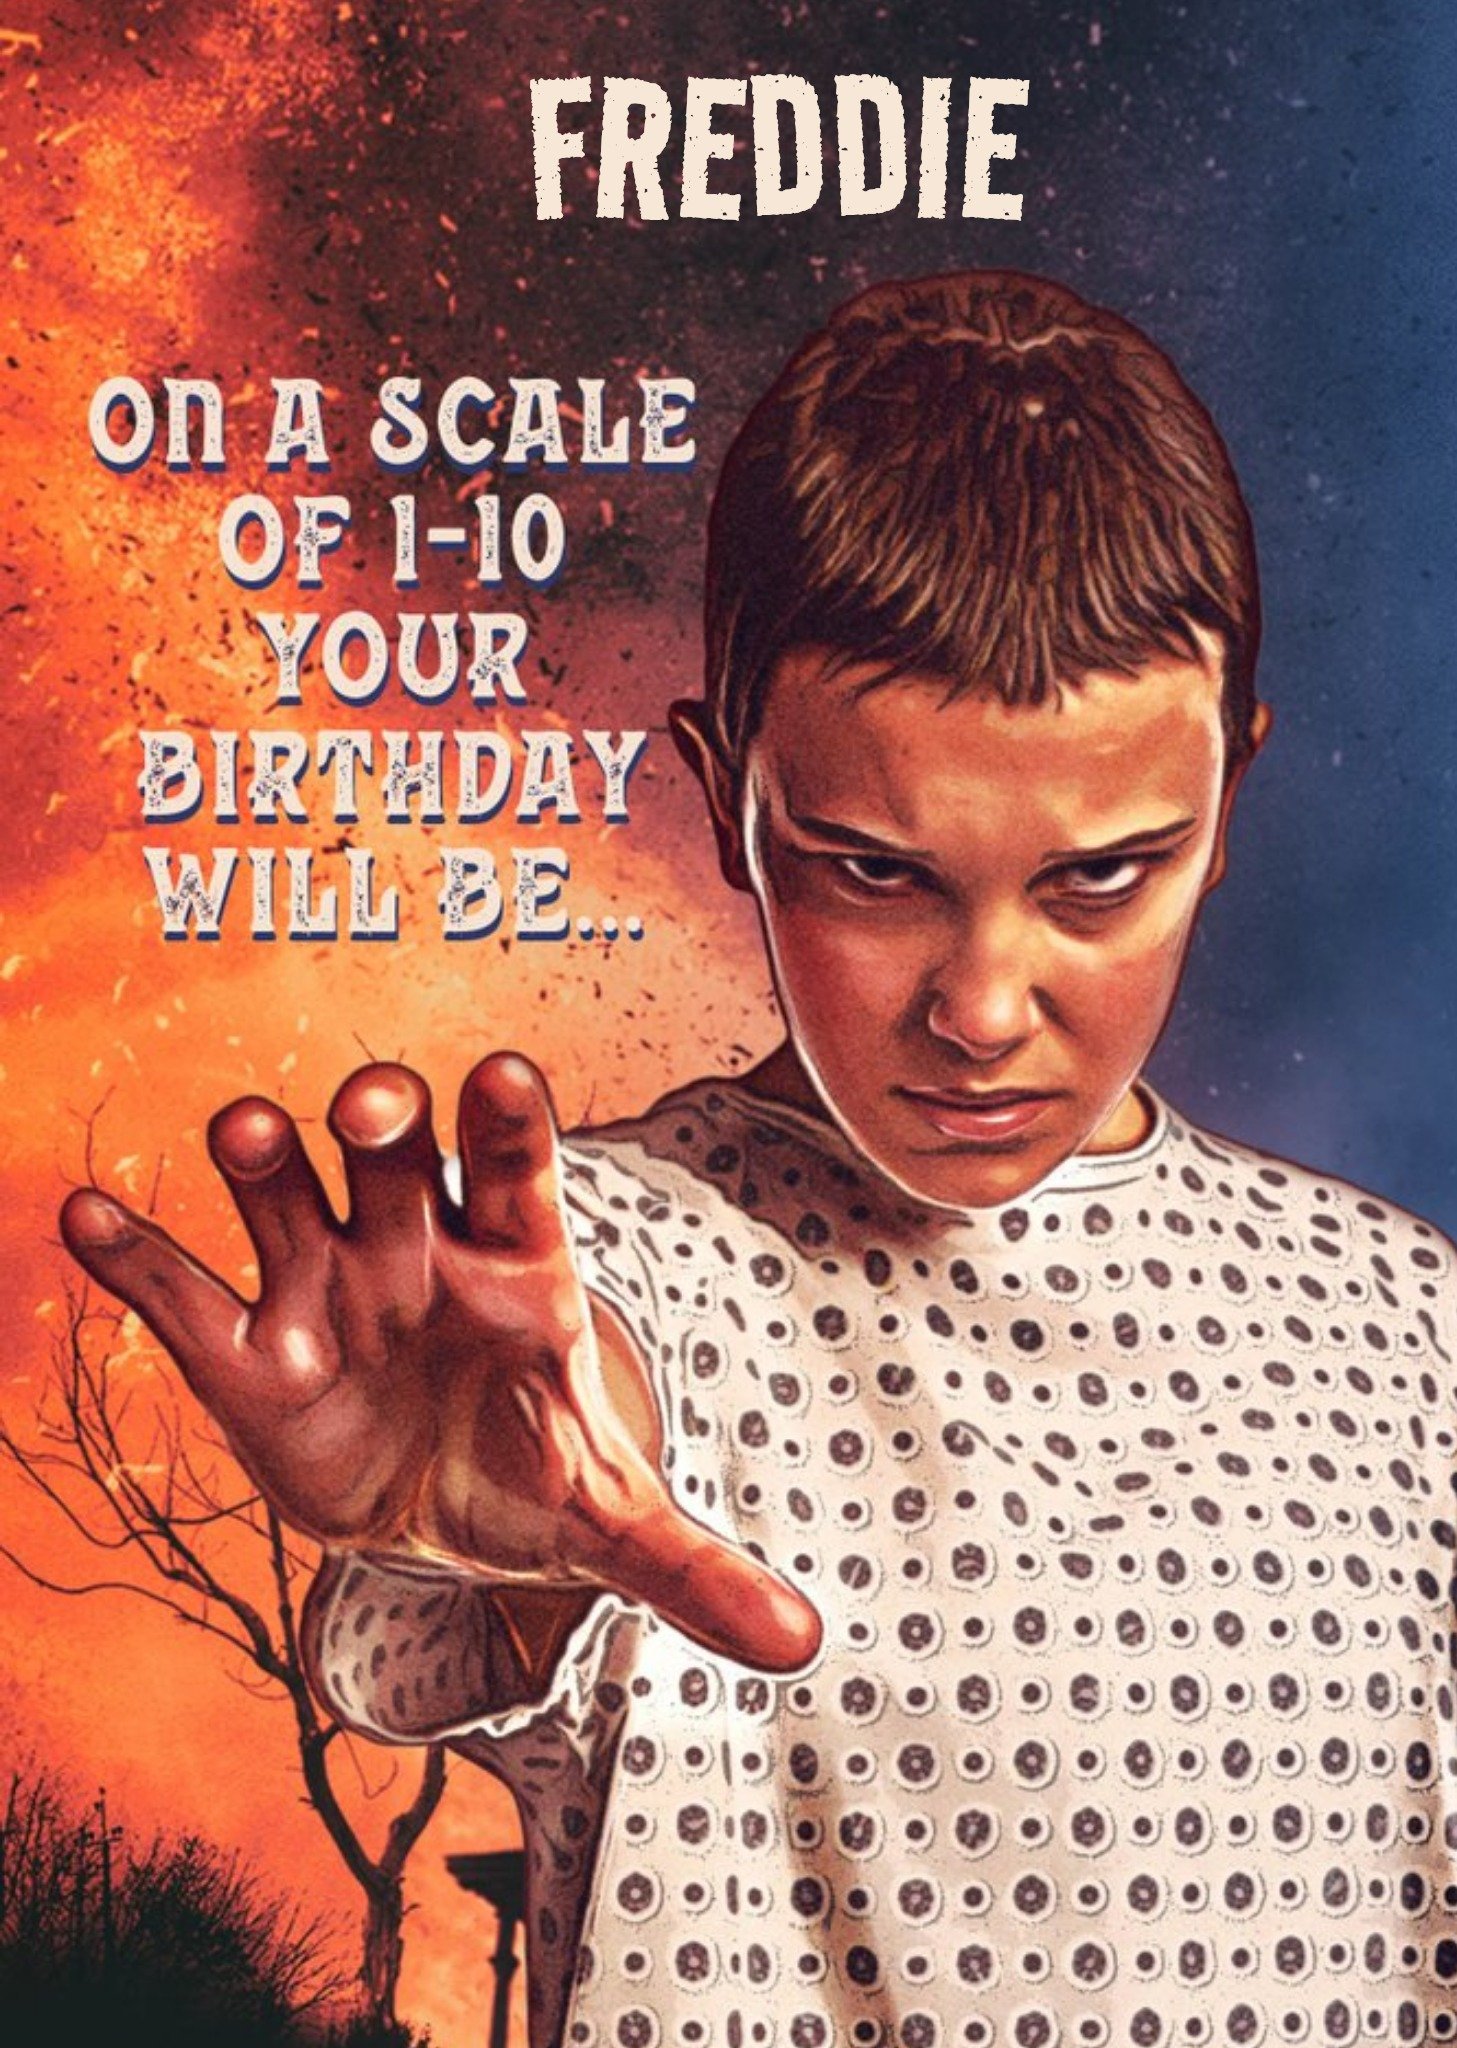 Moonpig Stranger Things On A Scale Of 1-10 Birthday Card Ecard